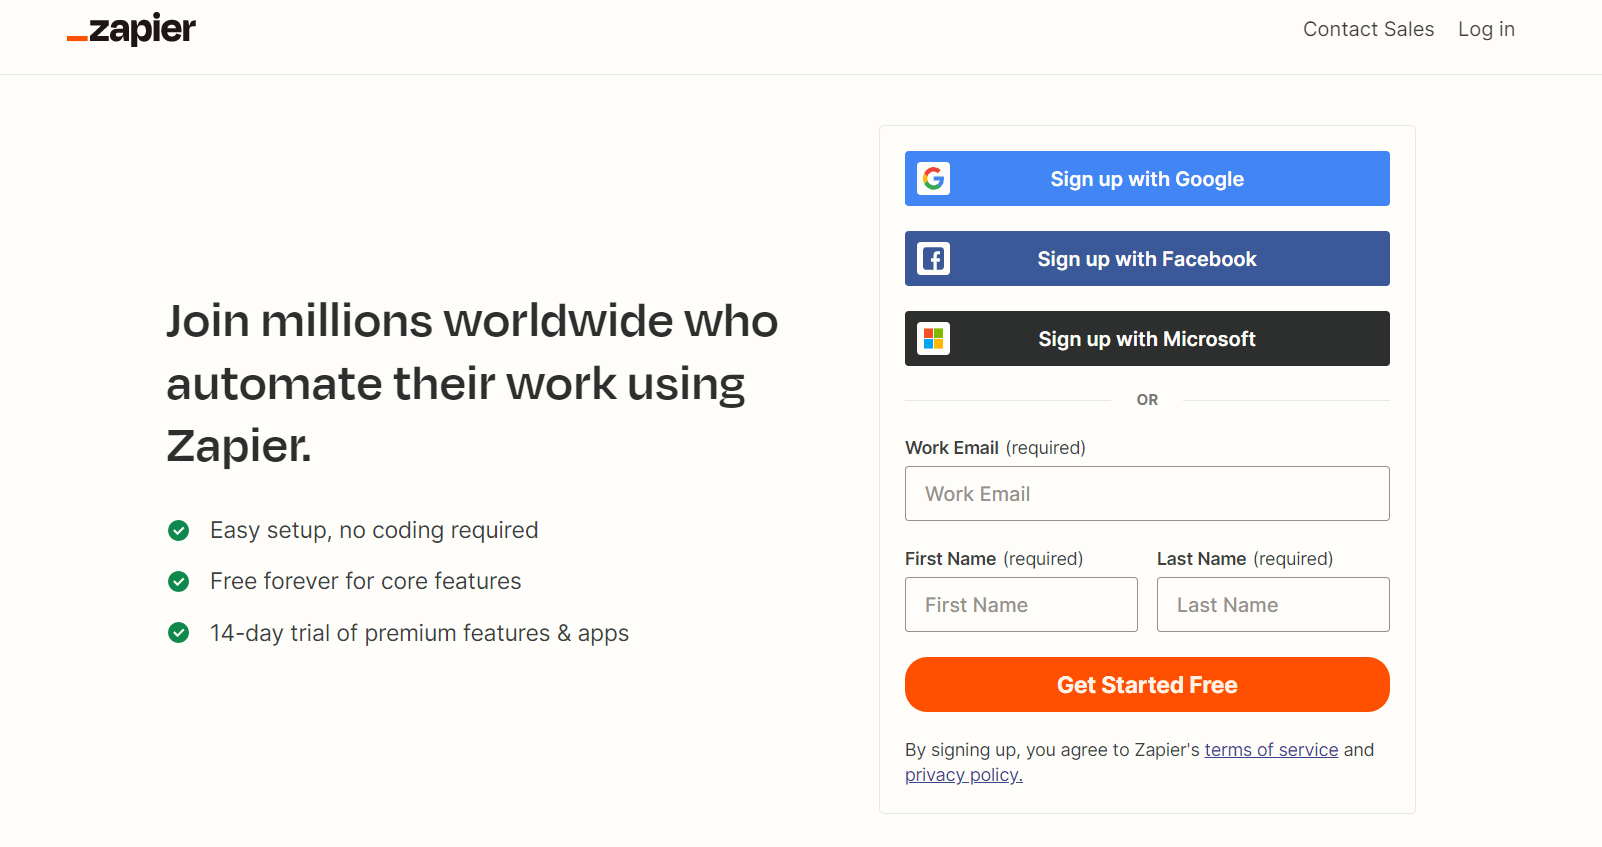 Create your Zapier account or sign up with your Google account